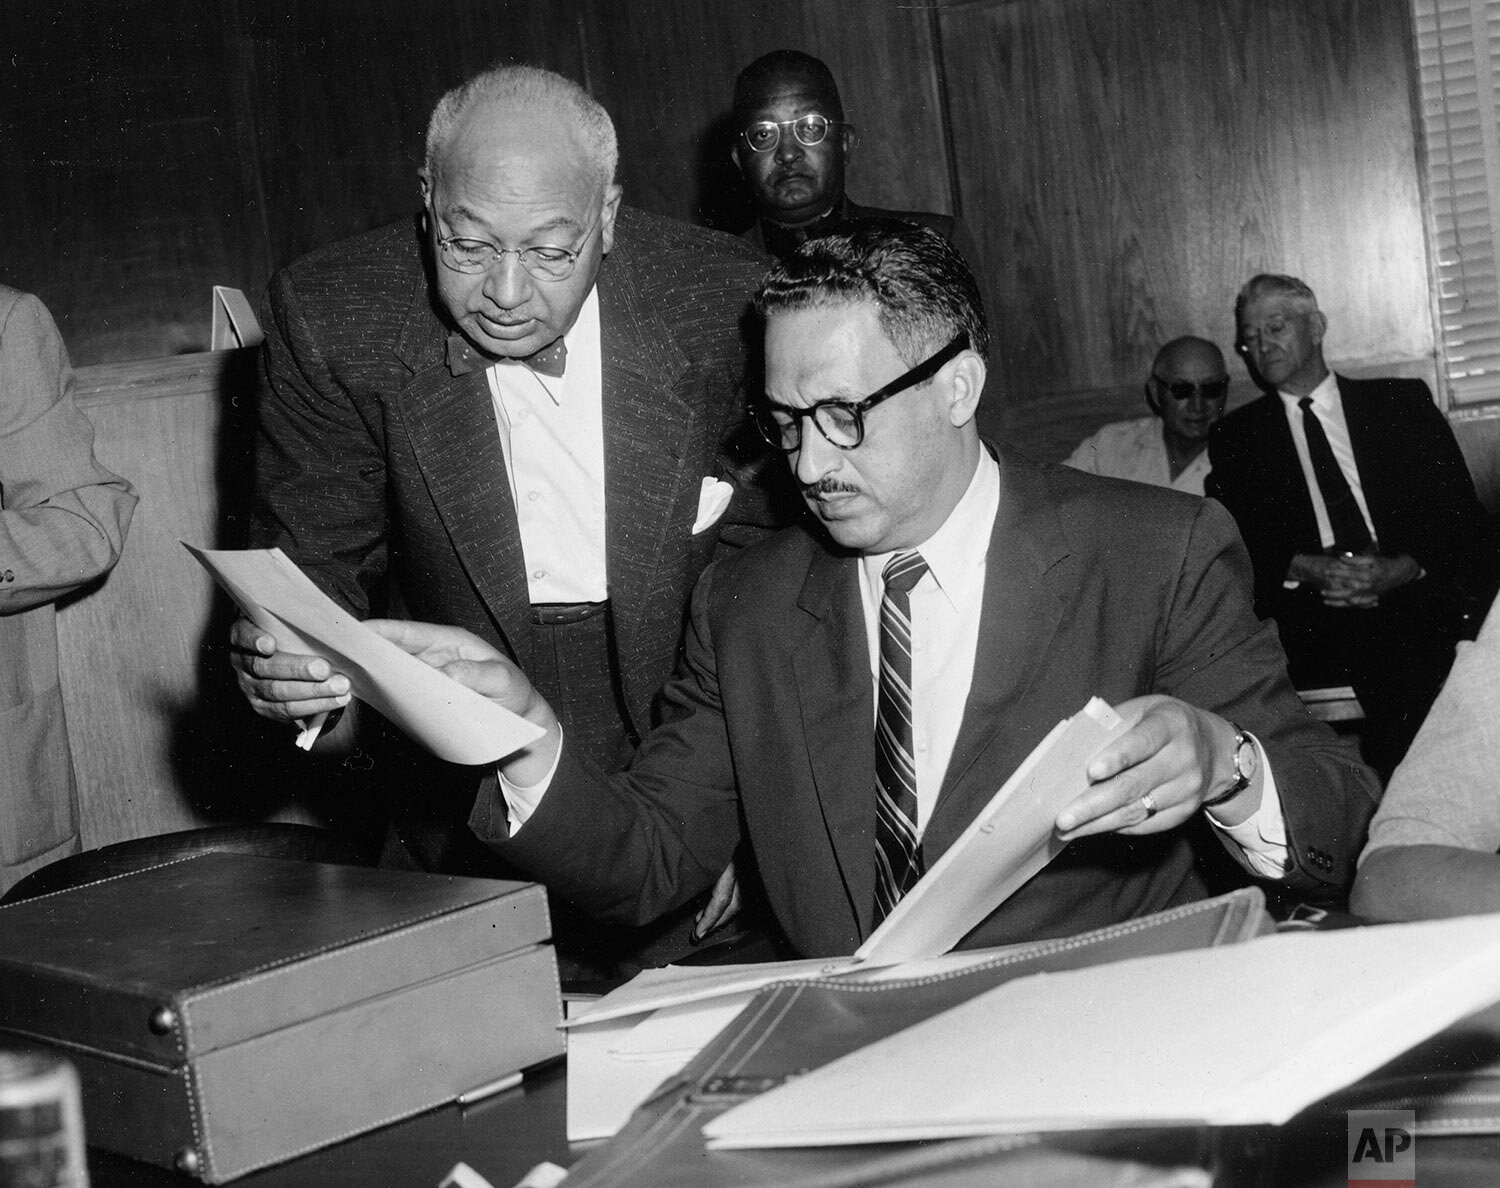  Thurgood Marshall, right, chief legal counsel of the National Association for the Advancement of Colored People, and Dallas attorney U. Simpson Tate, left, check documents during a court hearing in Tyler, Texas, September 28, 1956. They are trying t